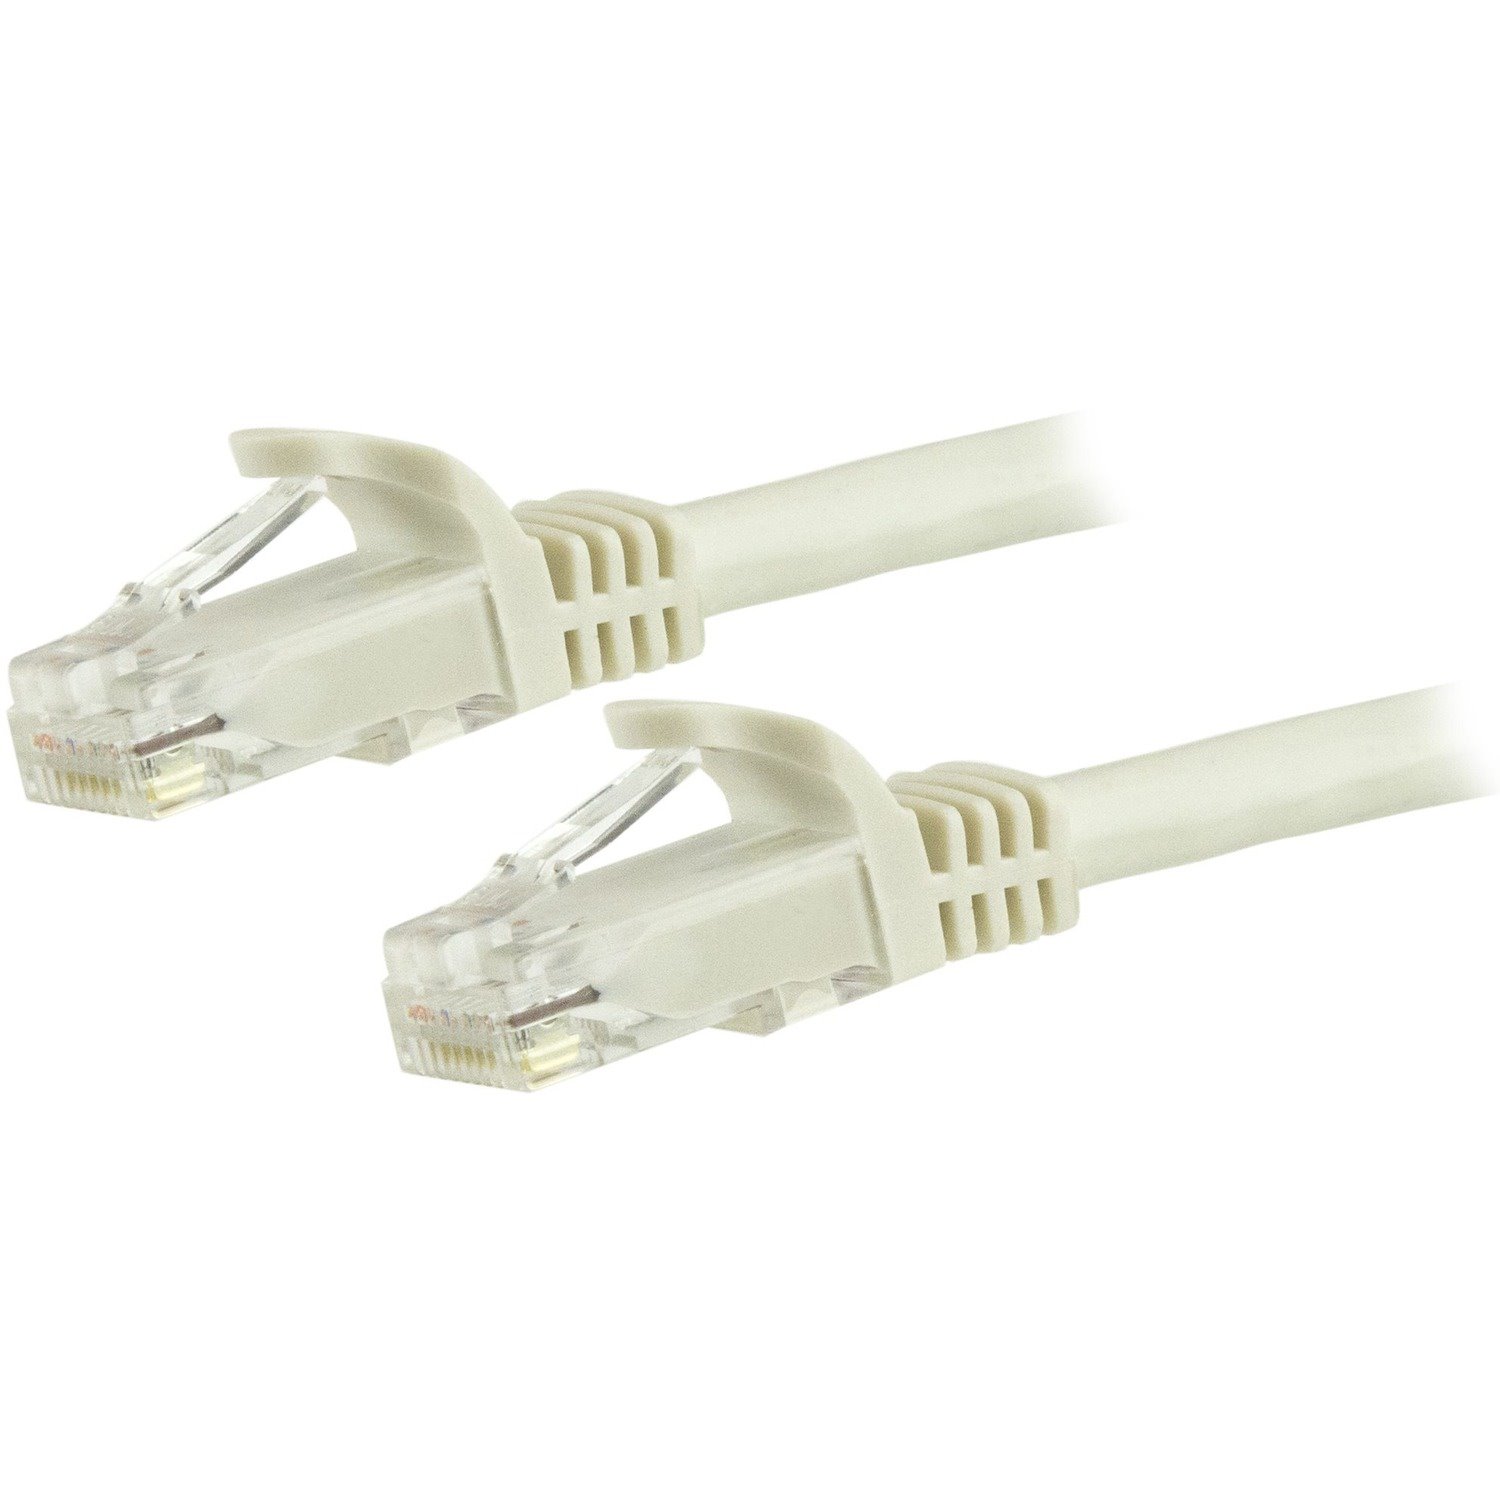 StarTech.com 1.5m CAT6 Ethernet Cable - White Snagless Gigabit - 100W PoE UTP 650MHz Category 6 Patch Cord UL Certified Wiring/TIA